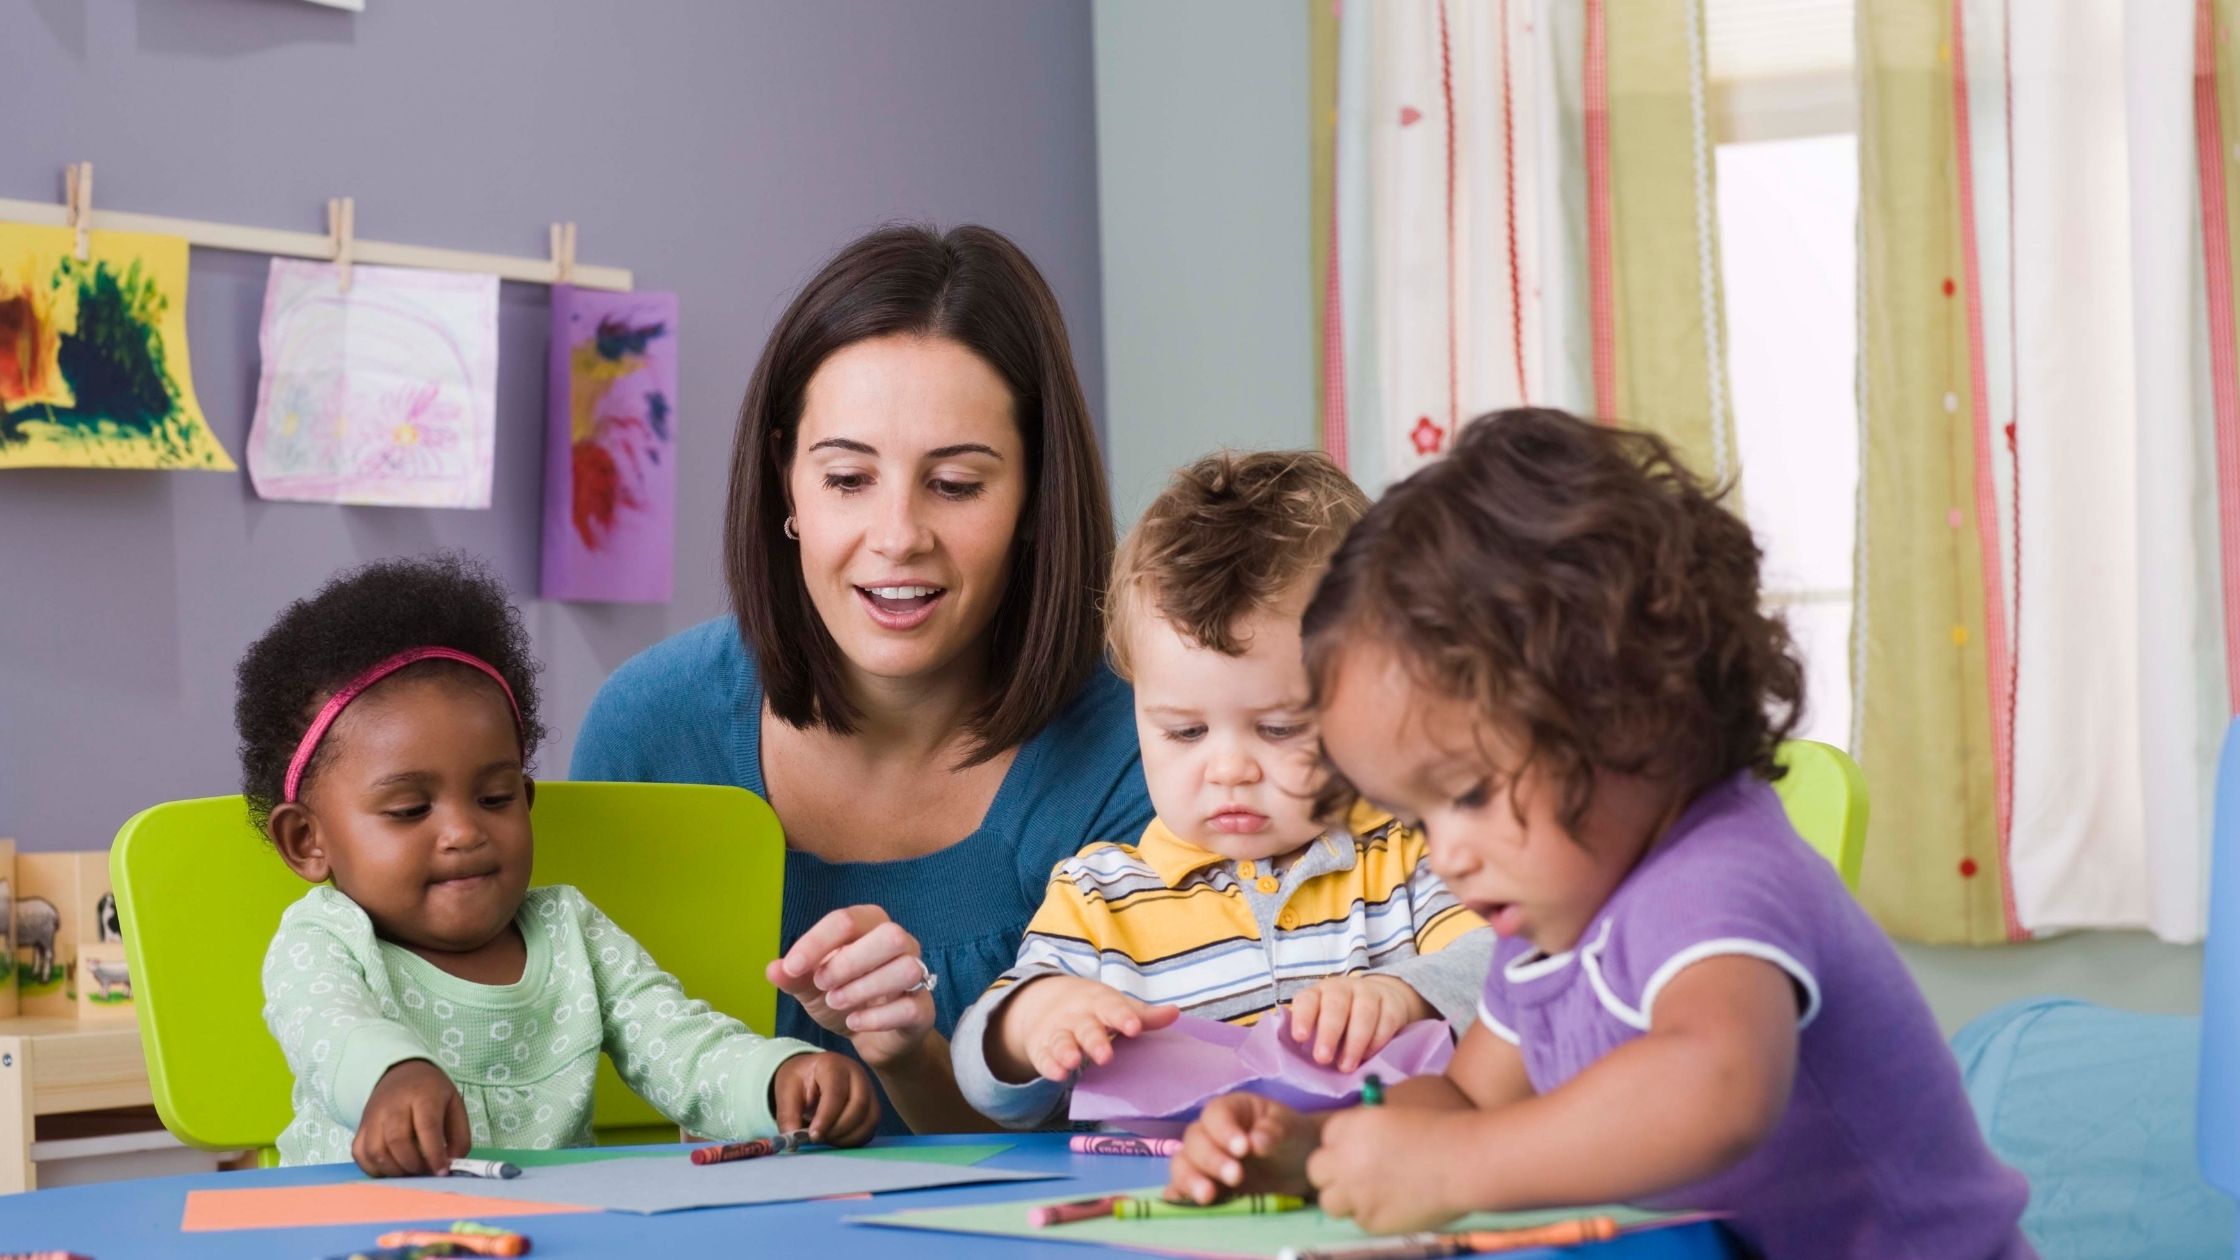 a housewife runs a daycare center at home